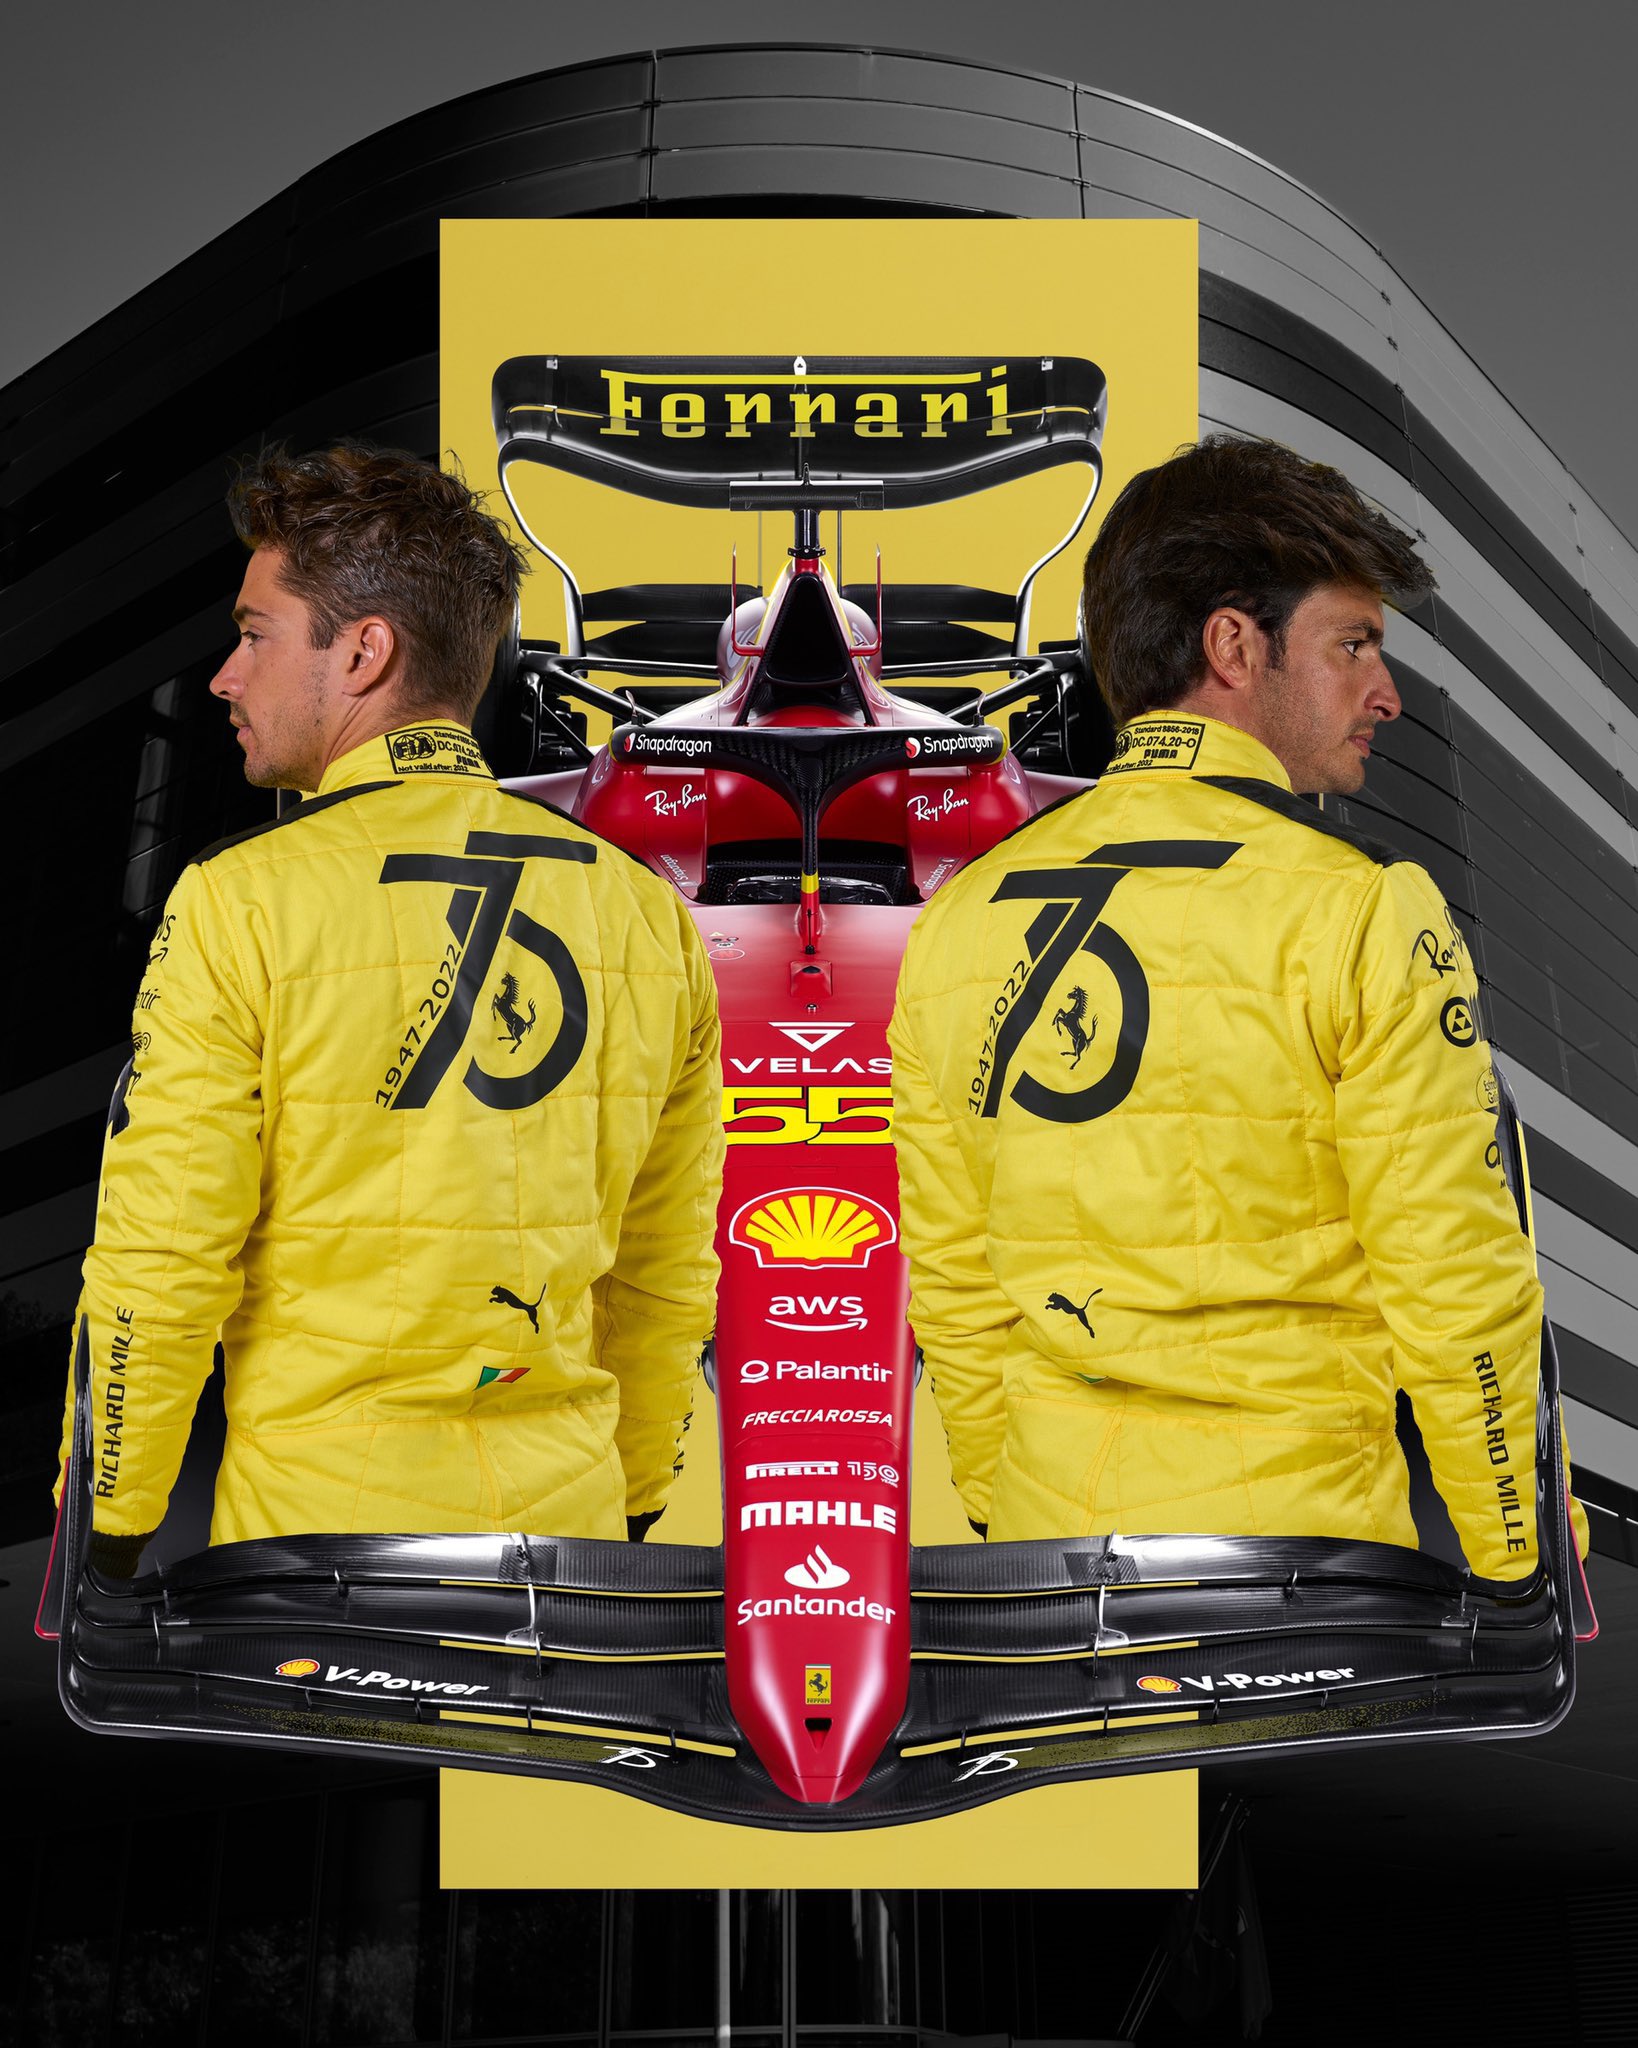 Ferrari unveils F1-75 with 'a splash of yellow' for Monza GP 